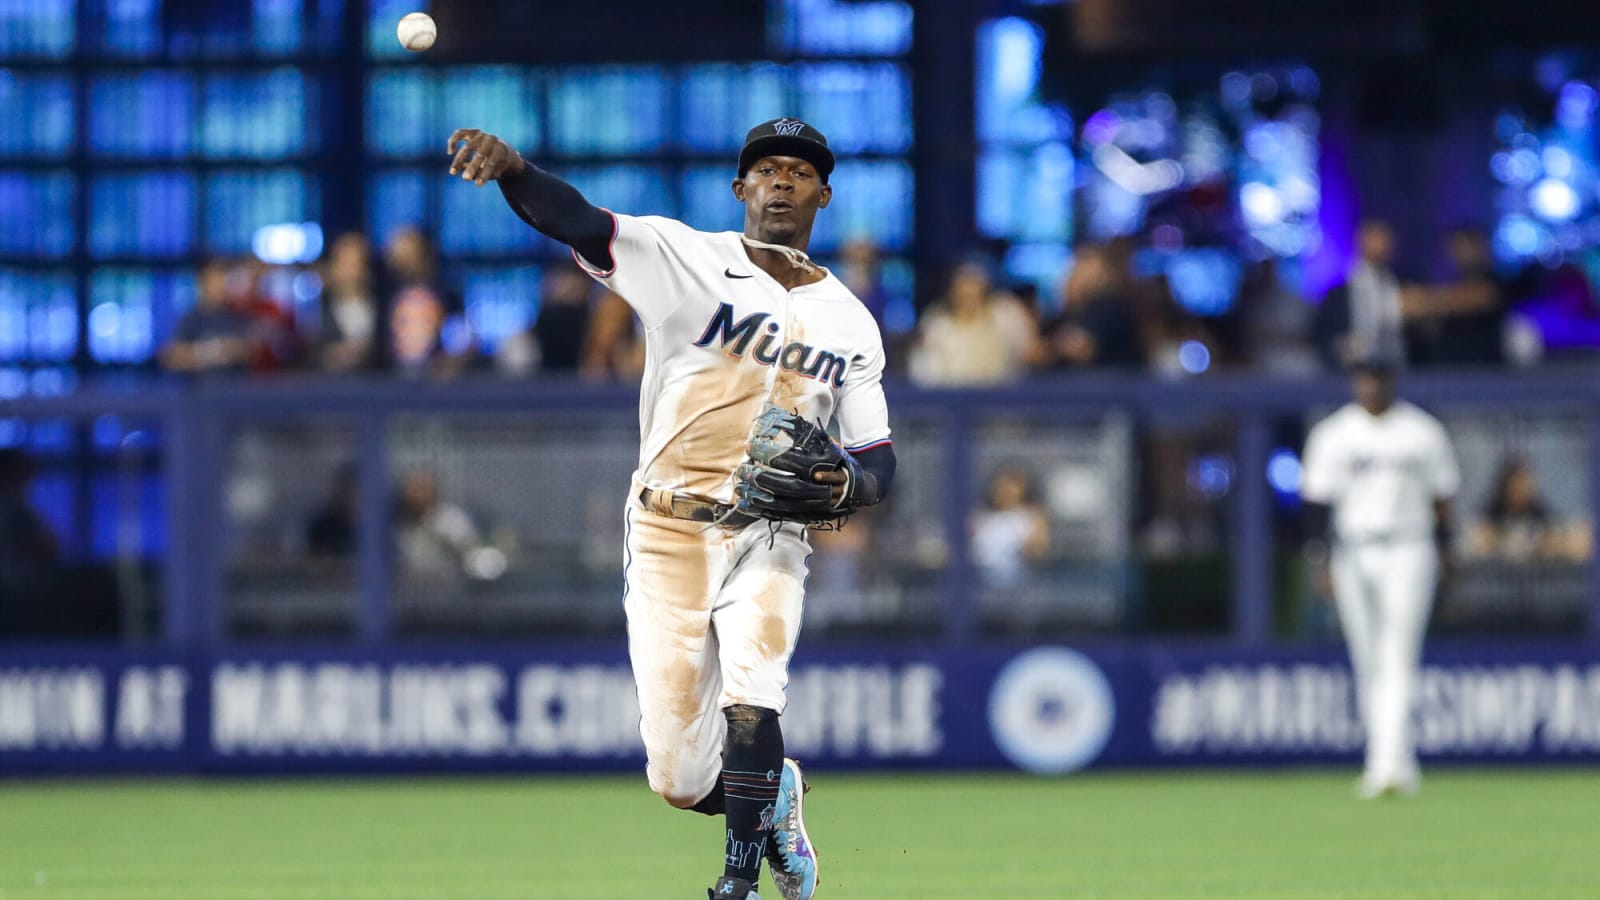 Baseball Twitter stunned by Miami Marlins' Jazz Chisholm Jr. being chosen  as cover athlete for MLB The Show 23: This is awful. No one wanted this